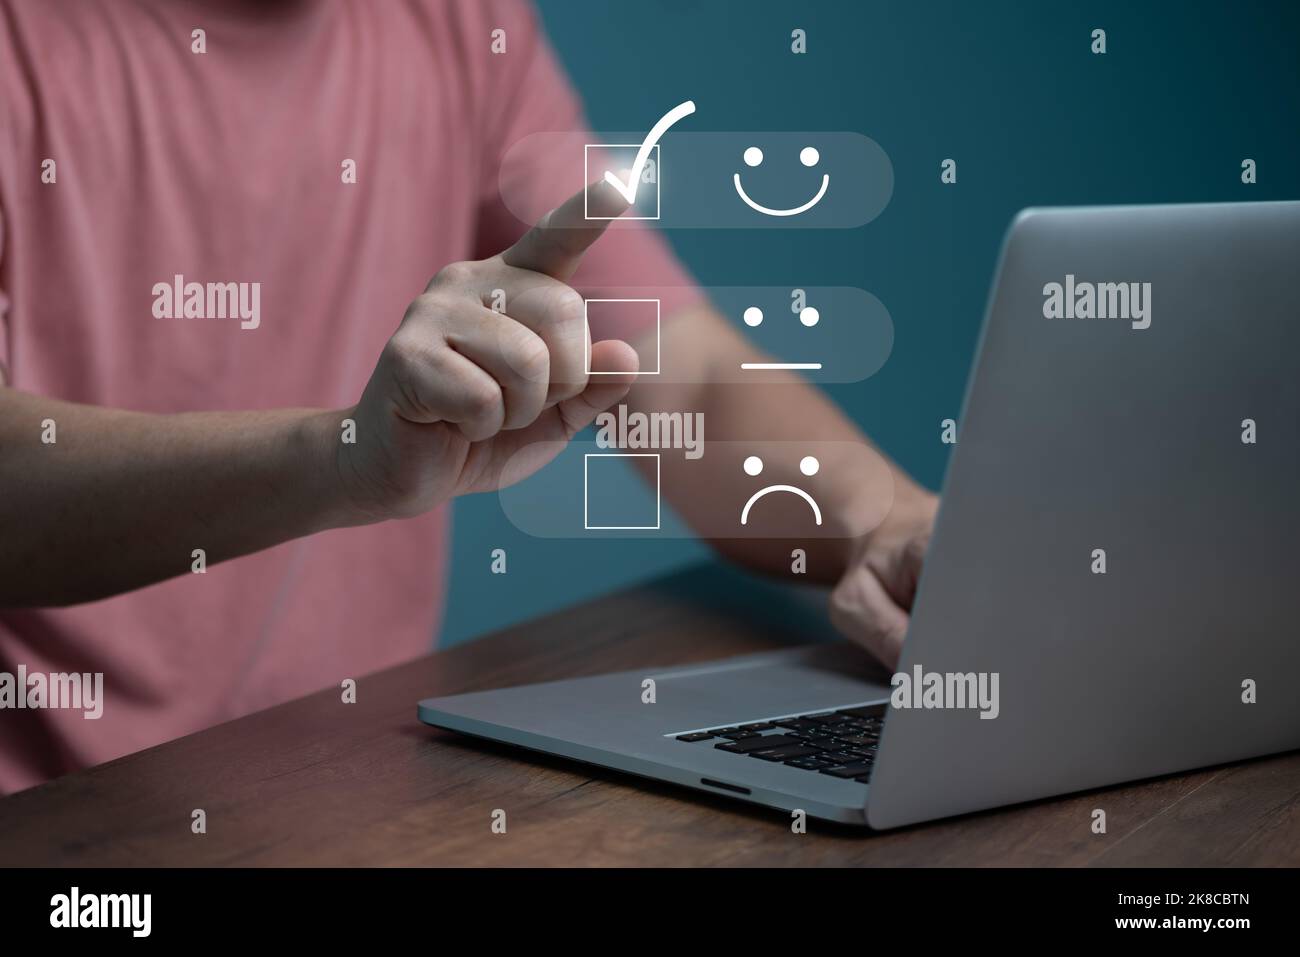 Customer service satisfaction concept ,Business people are touching the virtual screen on the happy Smiley face icon to give satisfaction in service. Stock Photo